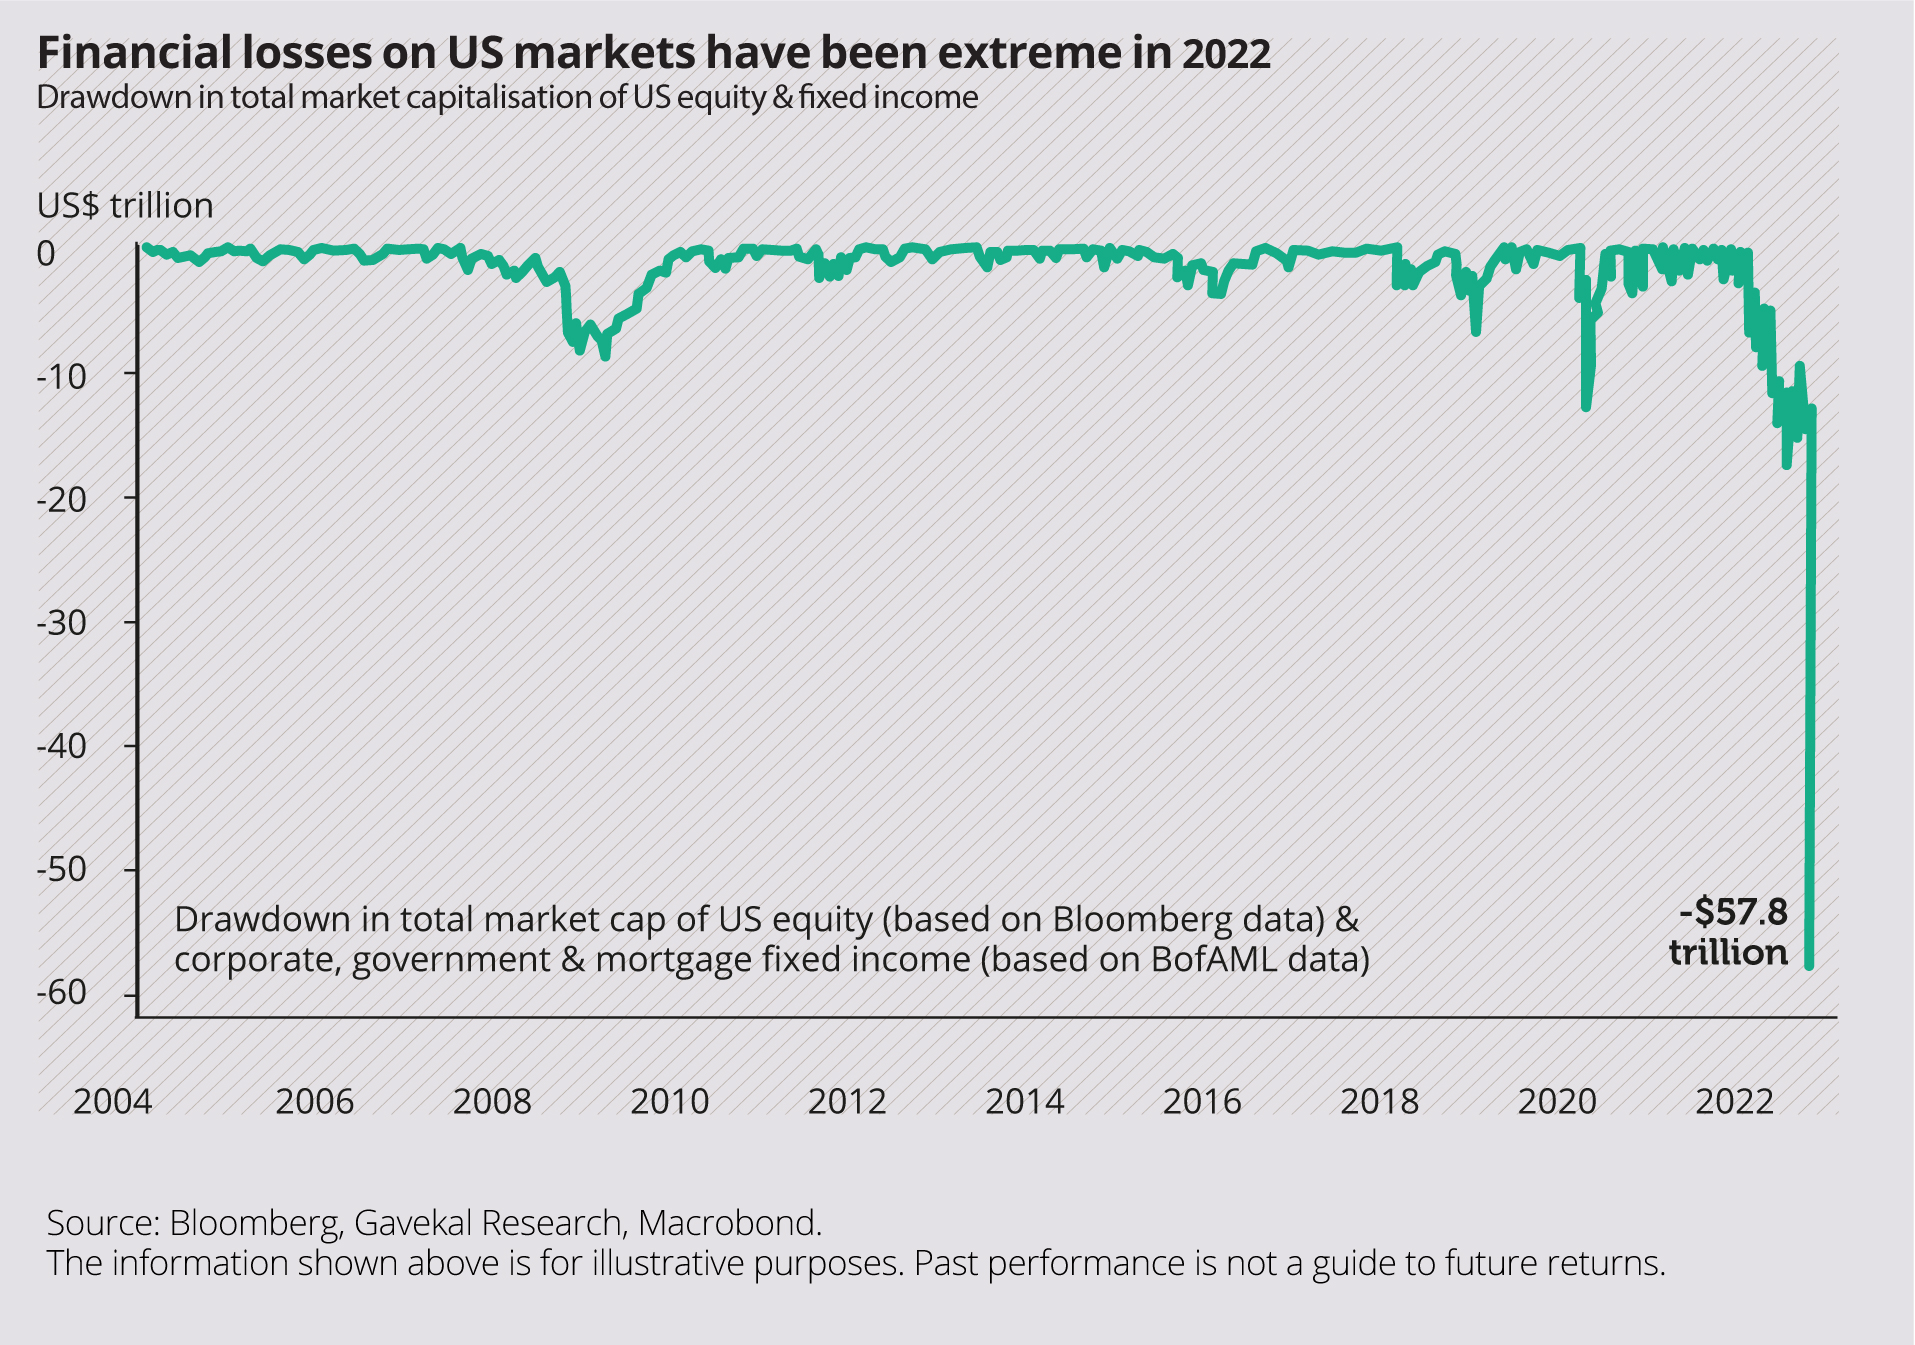 Financial losses on US markets have been extreme in 2022